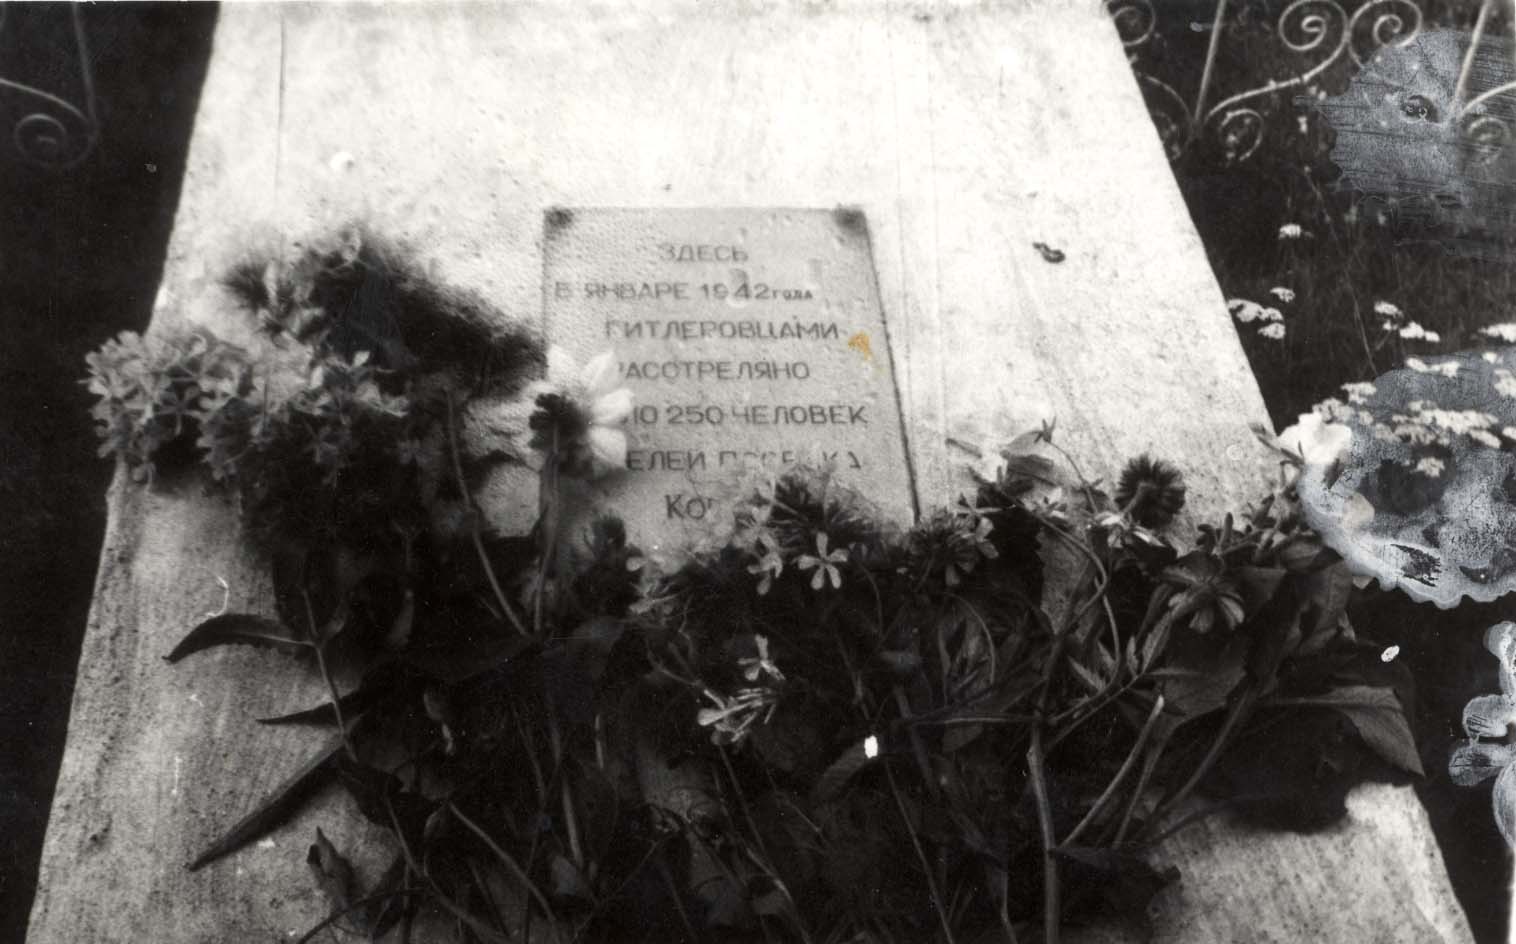 The memorial at the murder site